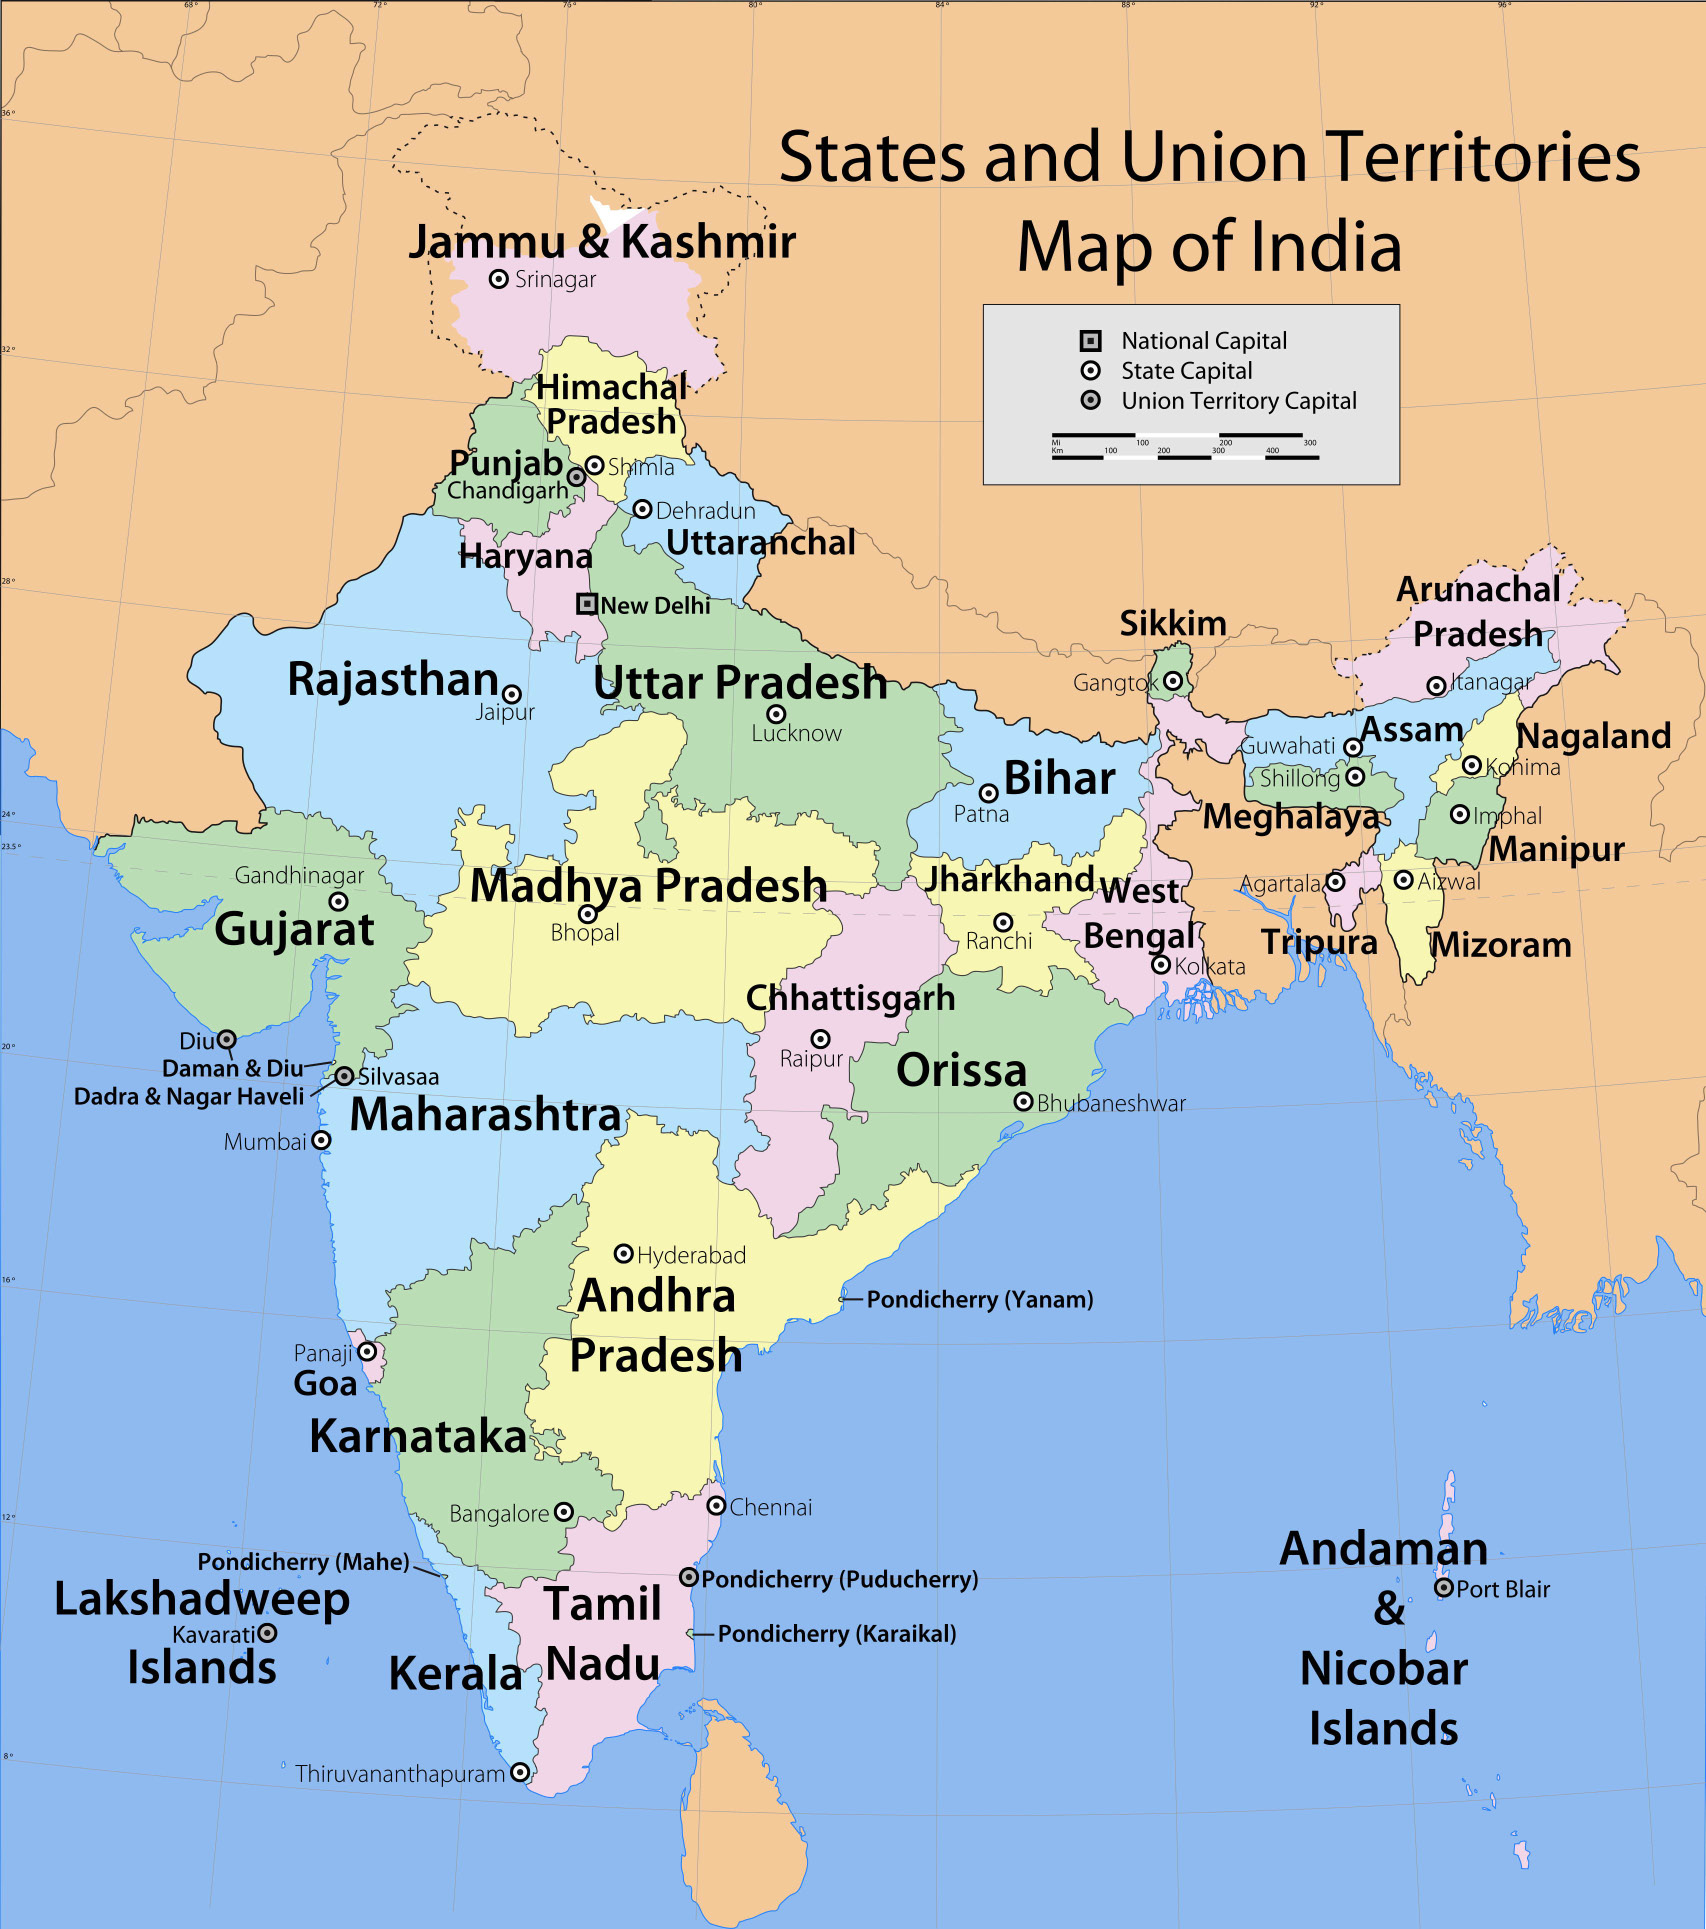 C3-India_states_and_union_territories_map.jpg